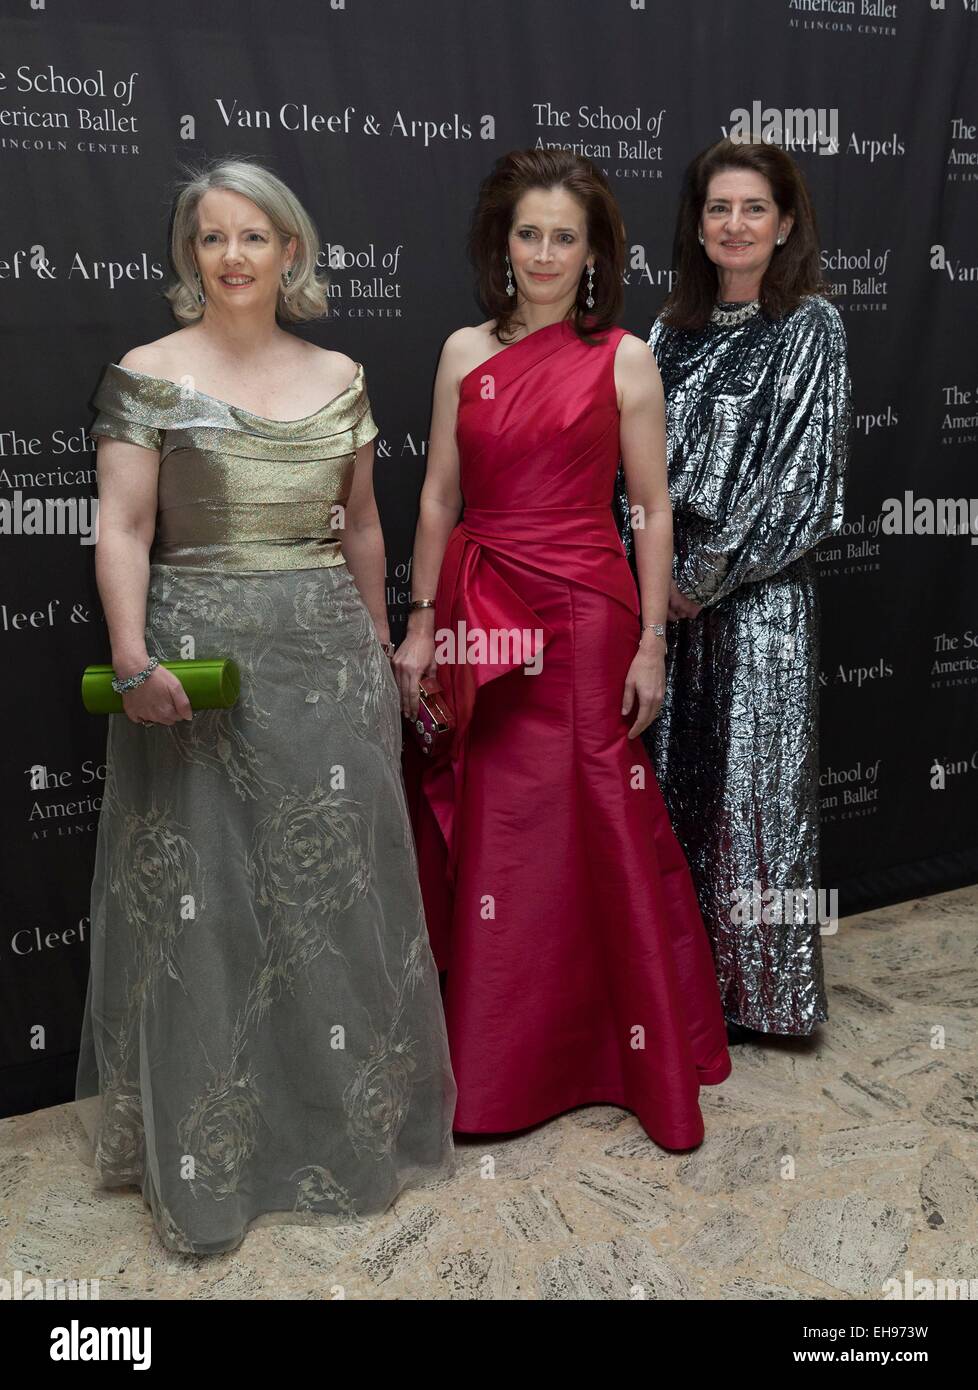 New York, NY, USA. Mar 9, 2015. Serena Lese, Joyce Giuffra, Laura Zeckendorf aux arrivées pour la School of American Ballet 2015 Winer Ball, David H. Koch Theater au Lincoln Center, New York, NY 9 mars 2015. © Lev Radin/Everett Collection/Alamy Vivre sw Banque D'Images